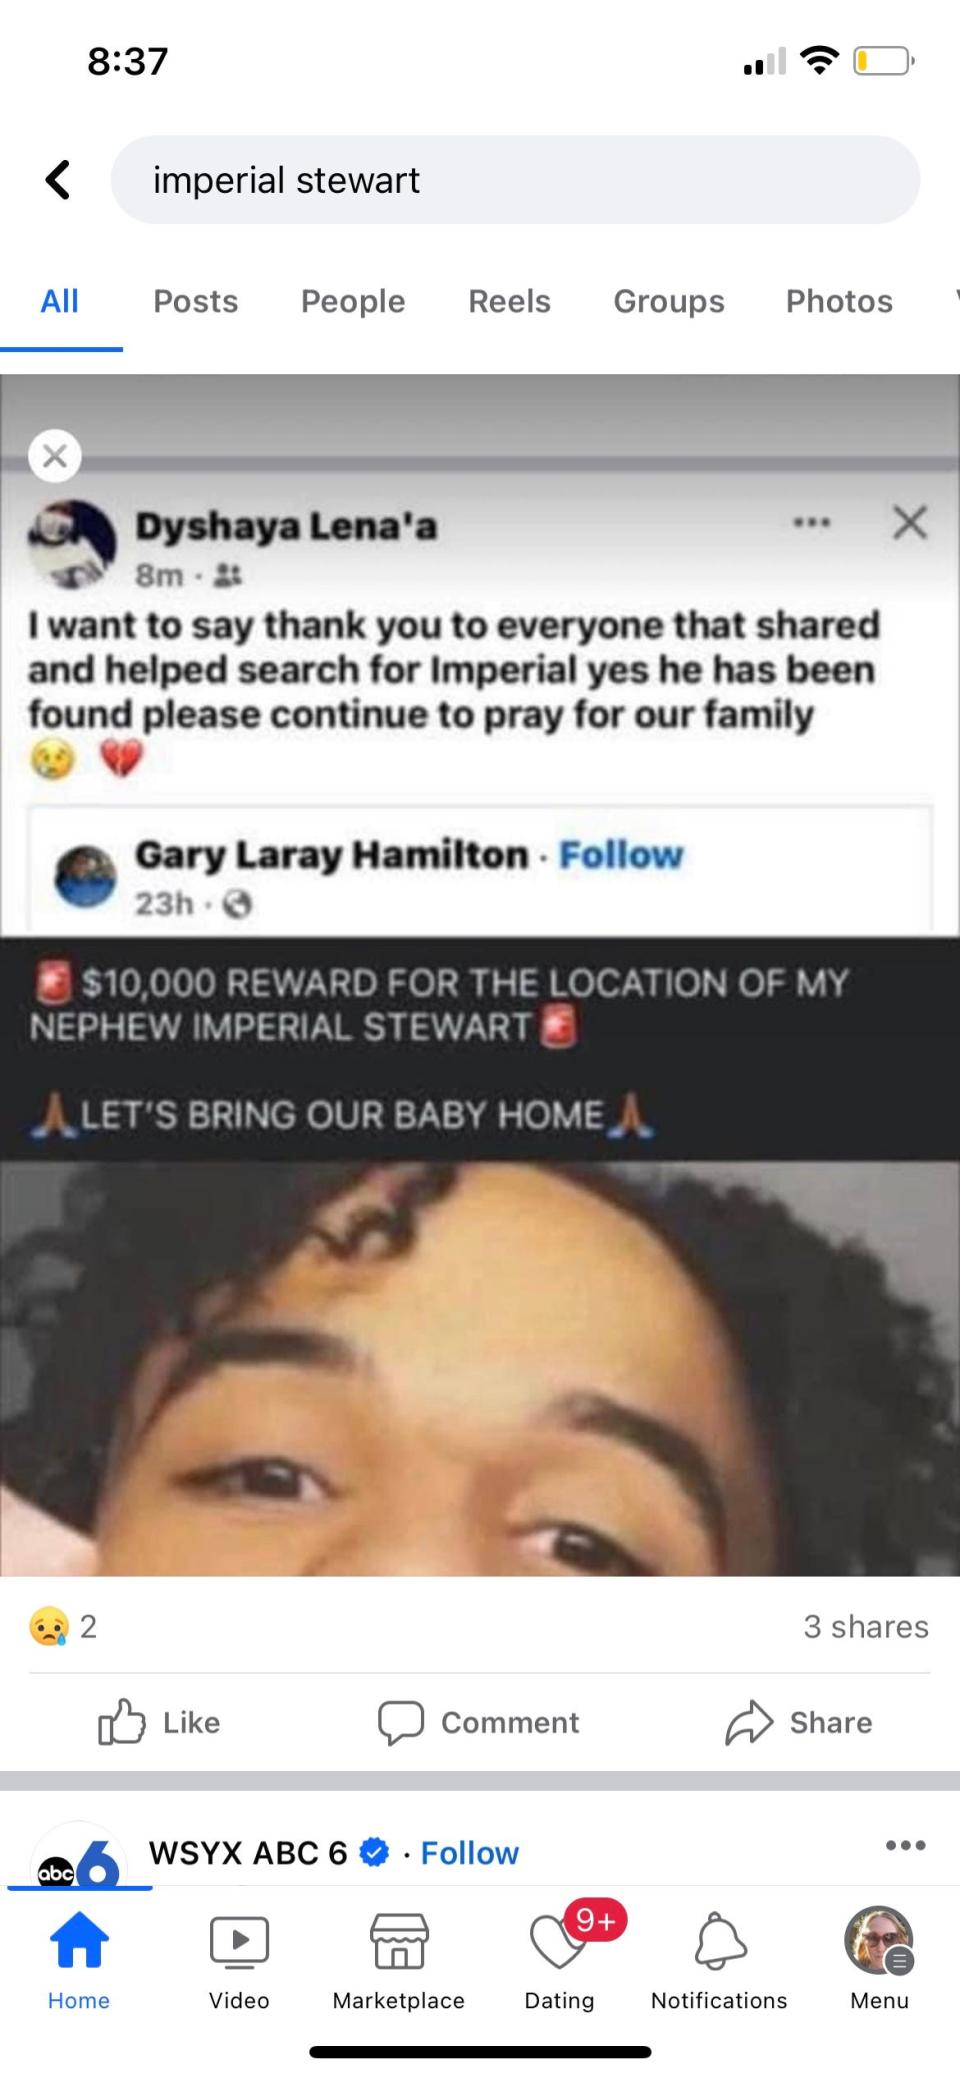 A message posted on social media Tuesday night by a relative of missing 17-year-old Imperial Stewart reported he has been found, but urged prayers for the family and contained crying and broken heart emojis.